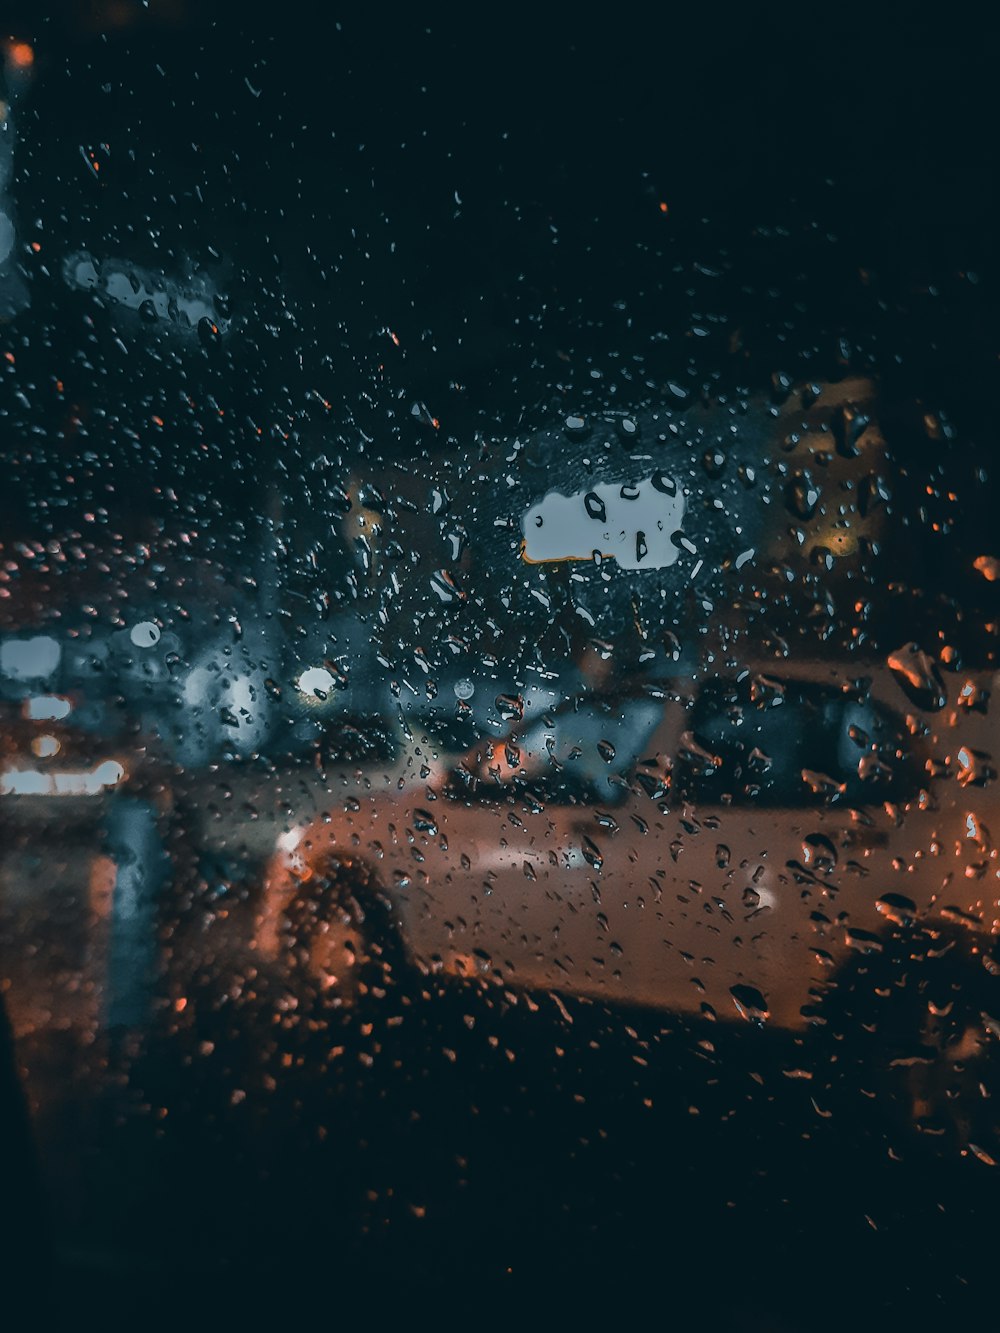 a view of a rainy street from inside a car